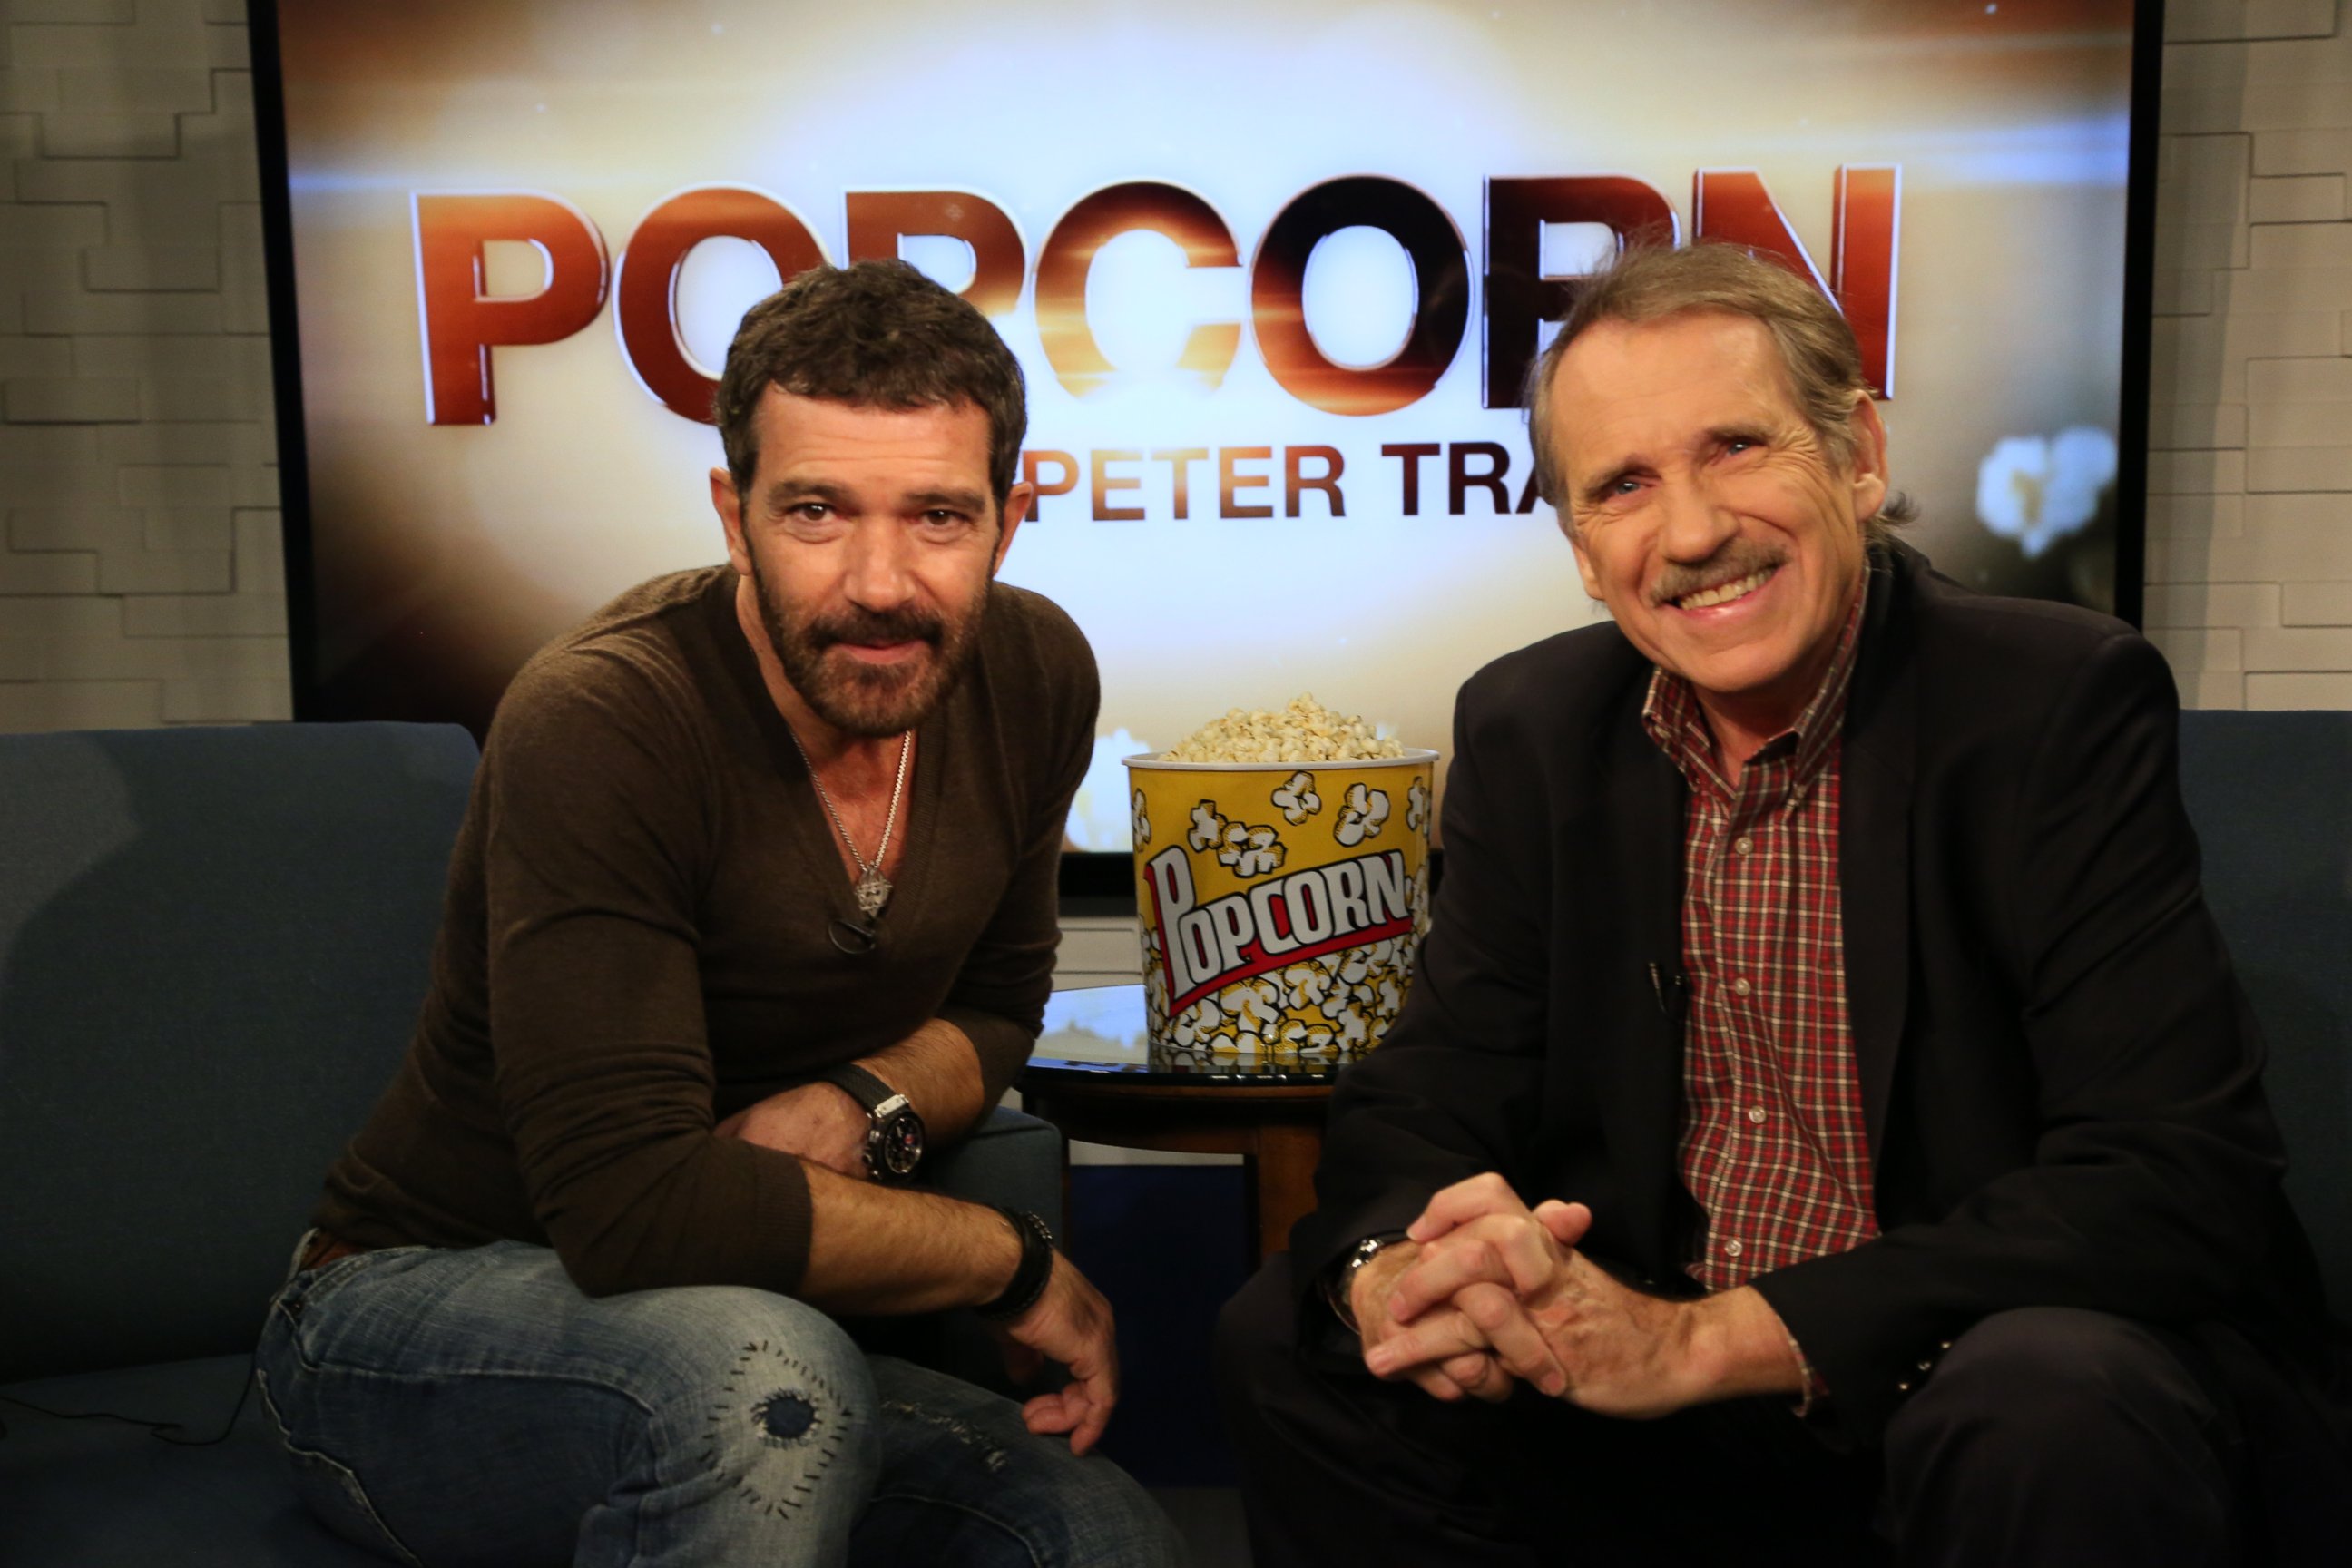 PHOTO: Antonio Banderas and Peter Travers on the set of 'Popcorn with Peter Travers' 